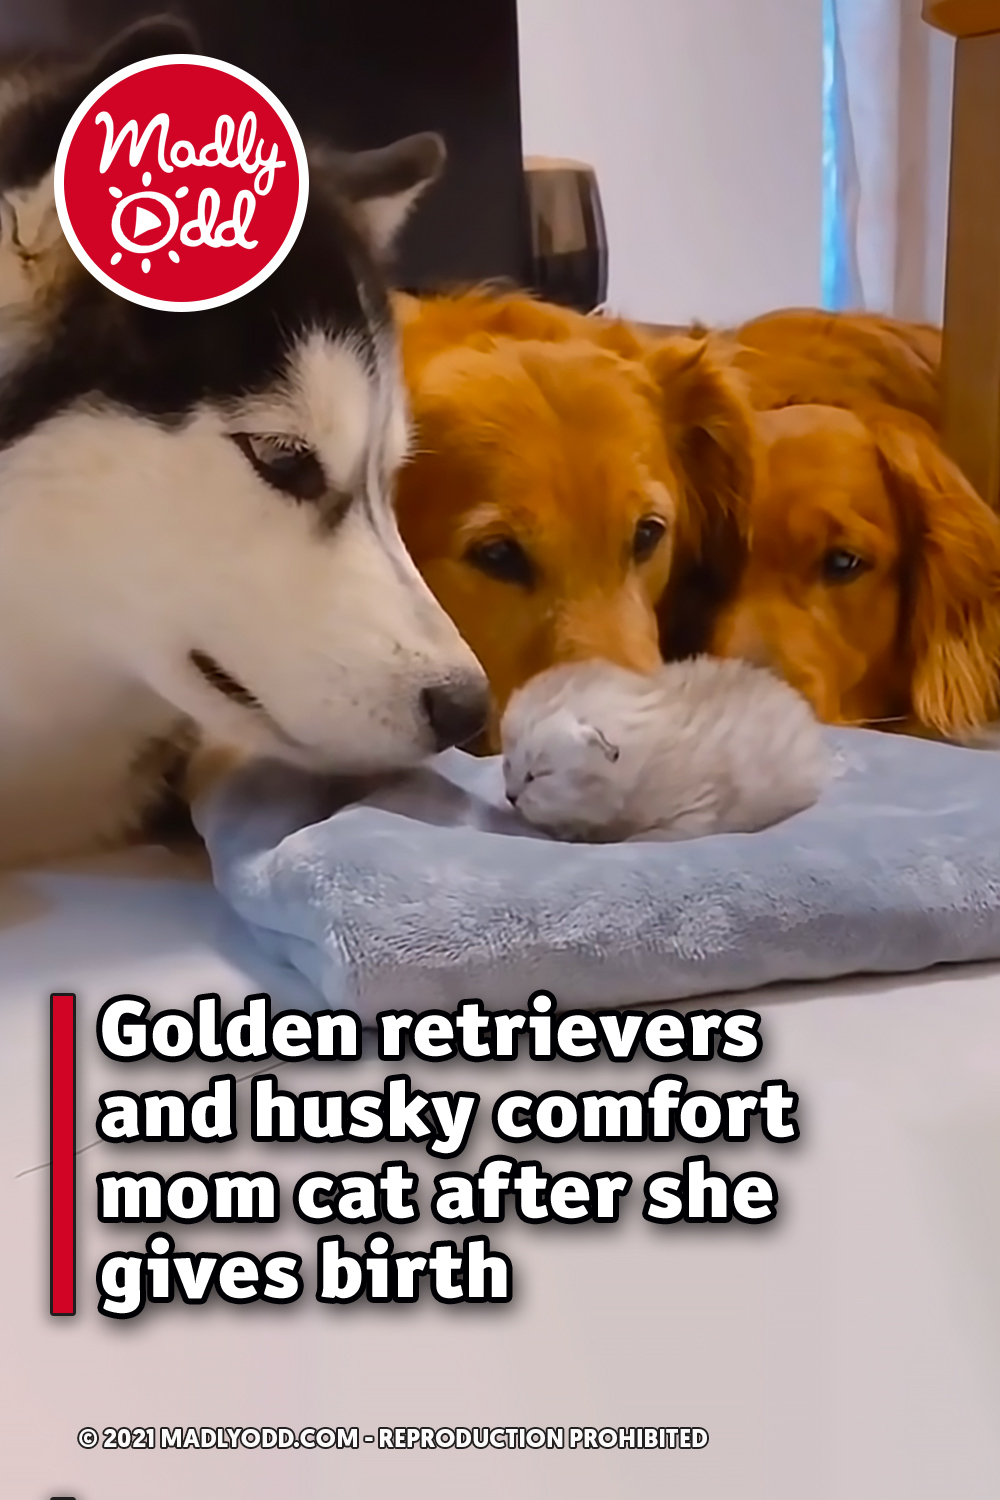 Golden retrievers and husky comfort mom cat after she gives birth